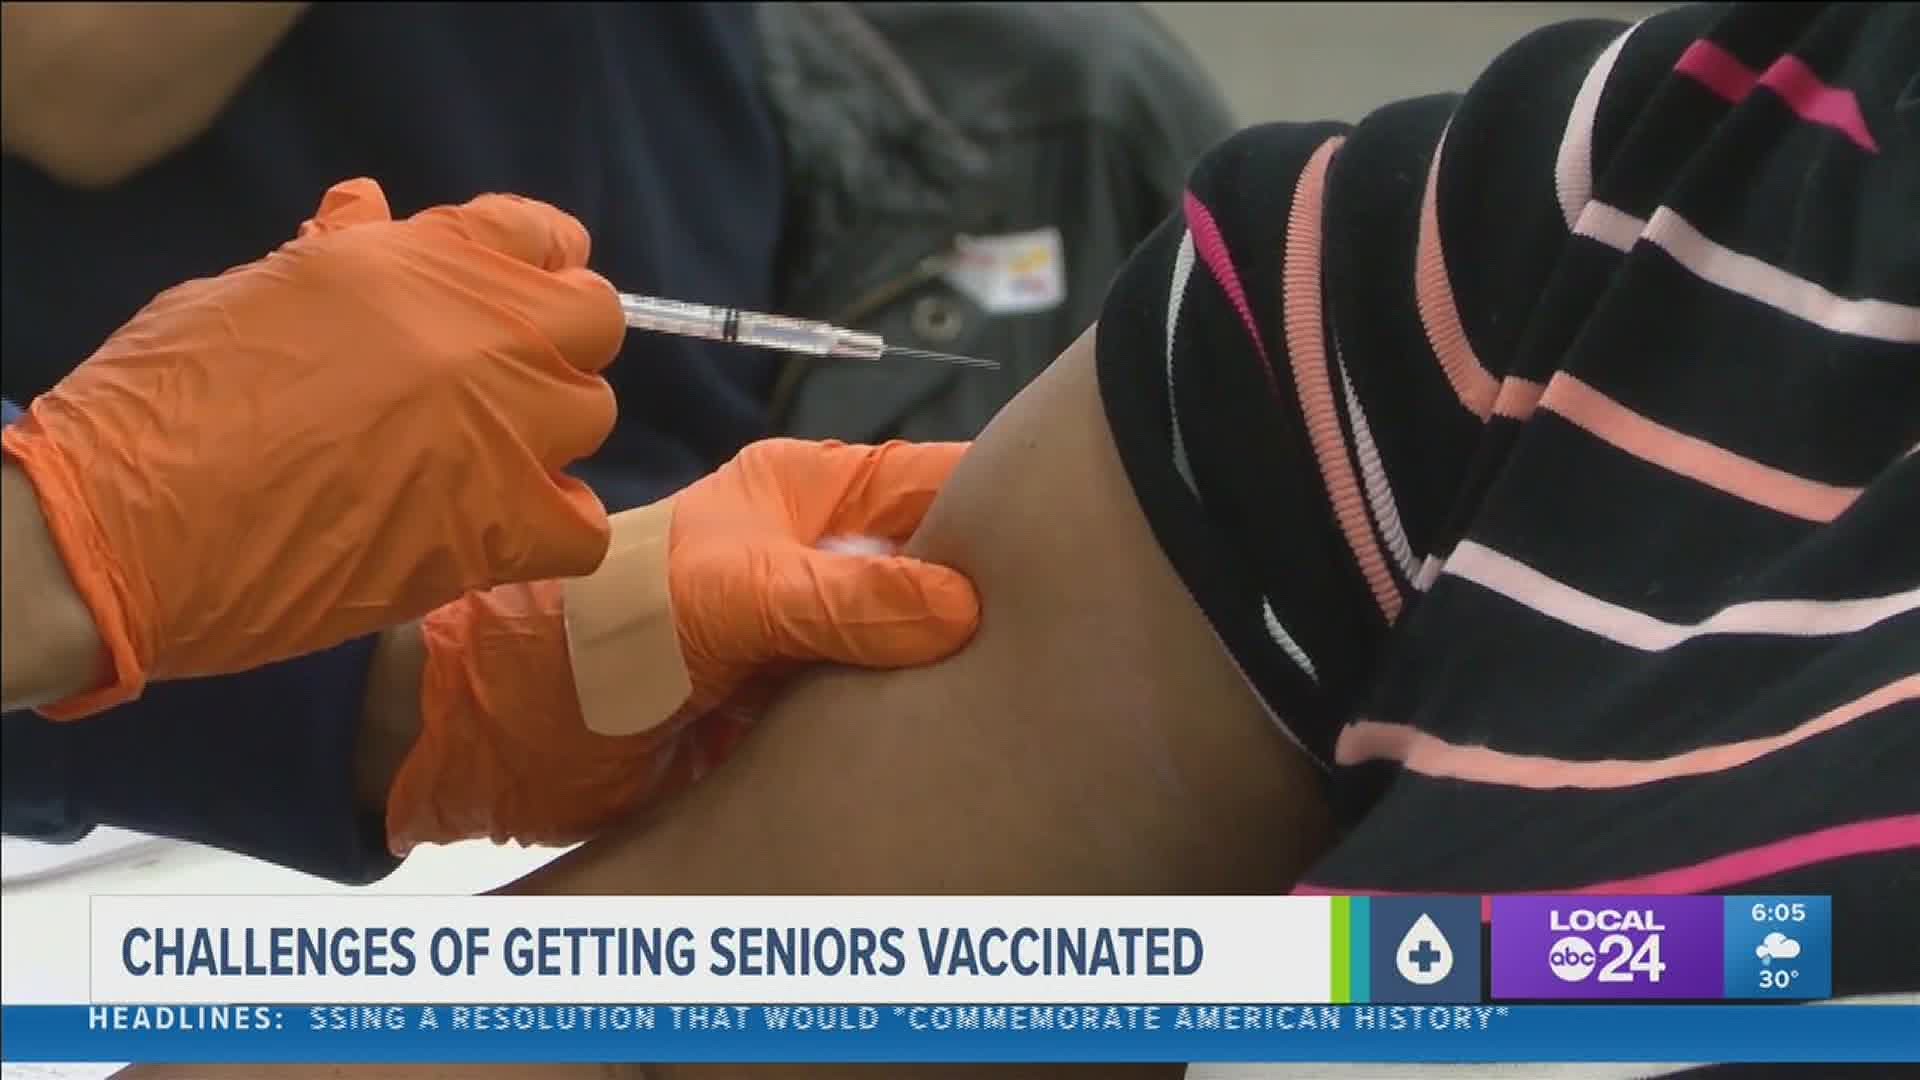 The Tennessee Health Department is trying to reach seniors for their vaccinations.